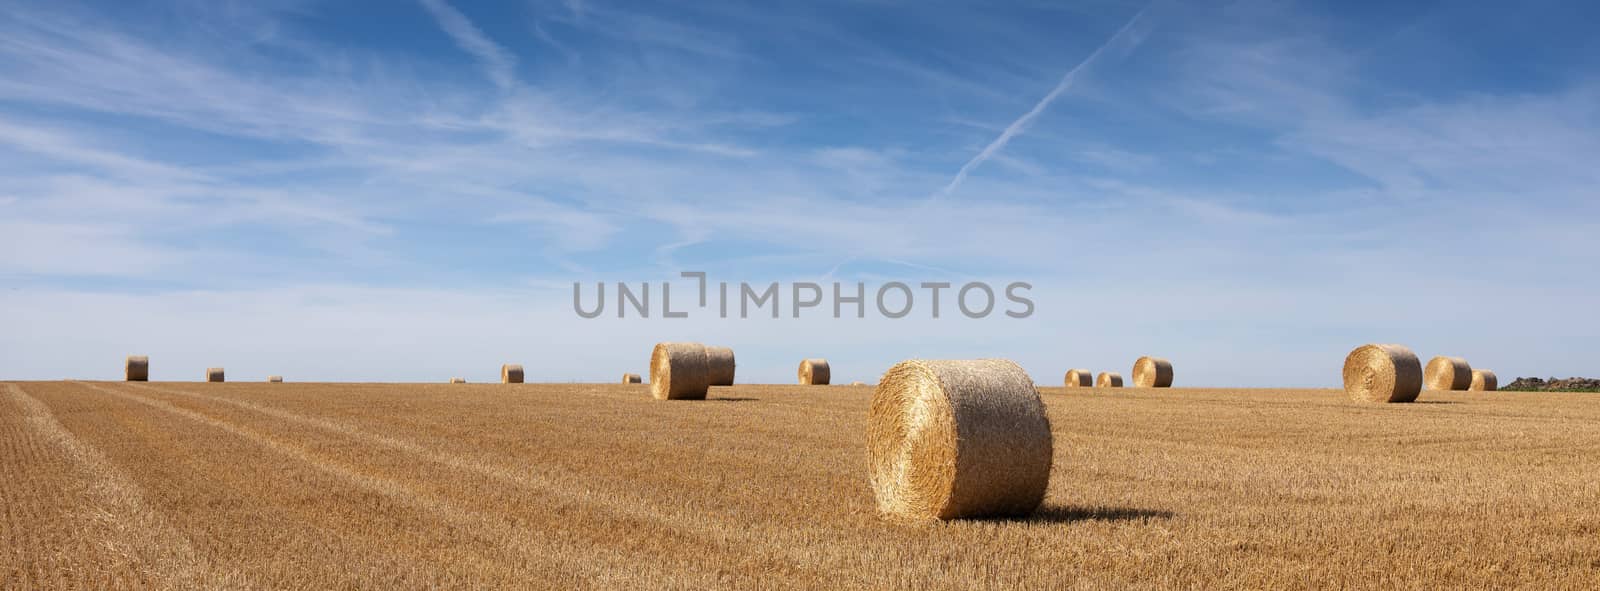 golden field with straw bales under blue sky in the north of france by ahavelaar